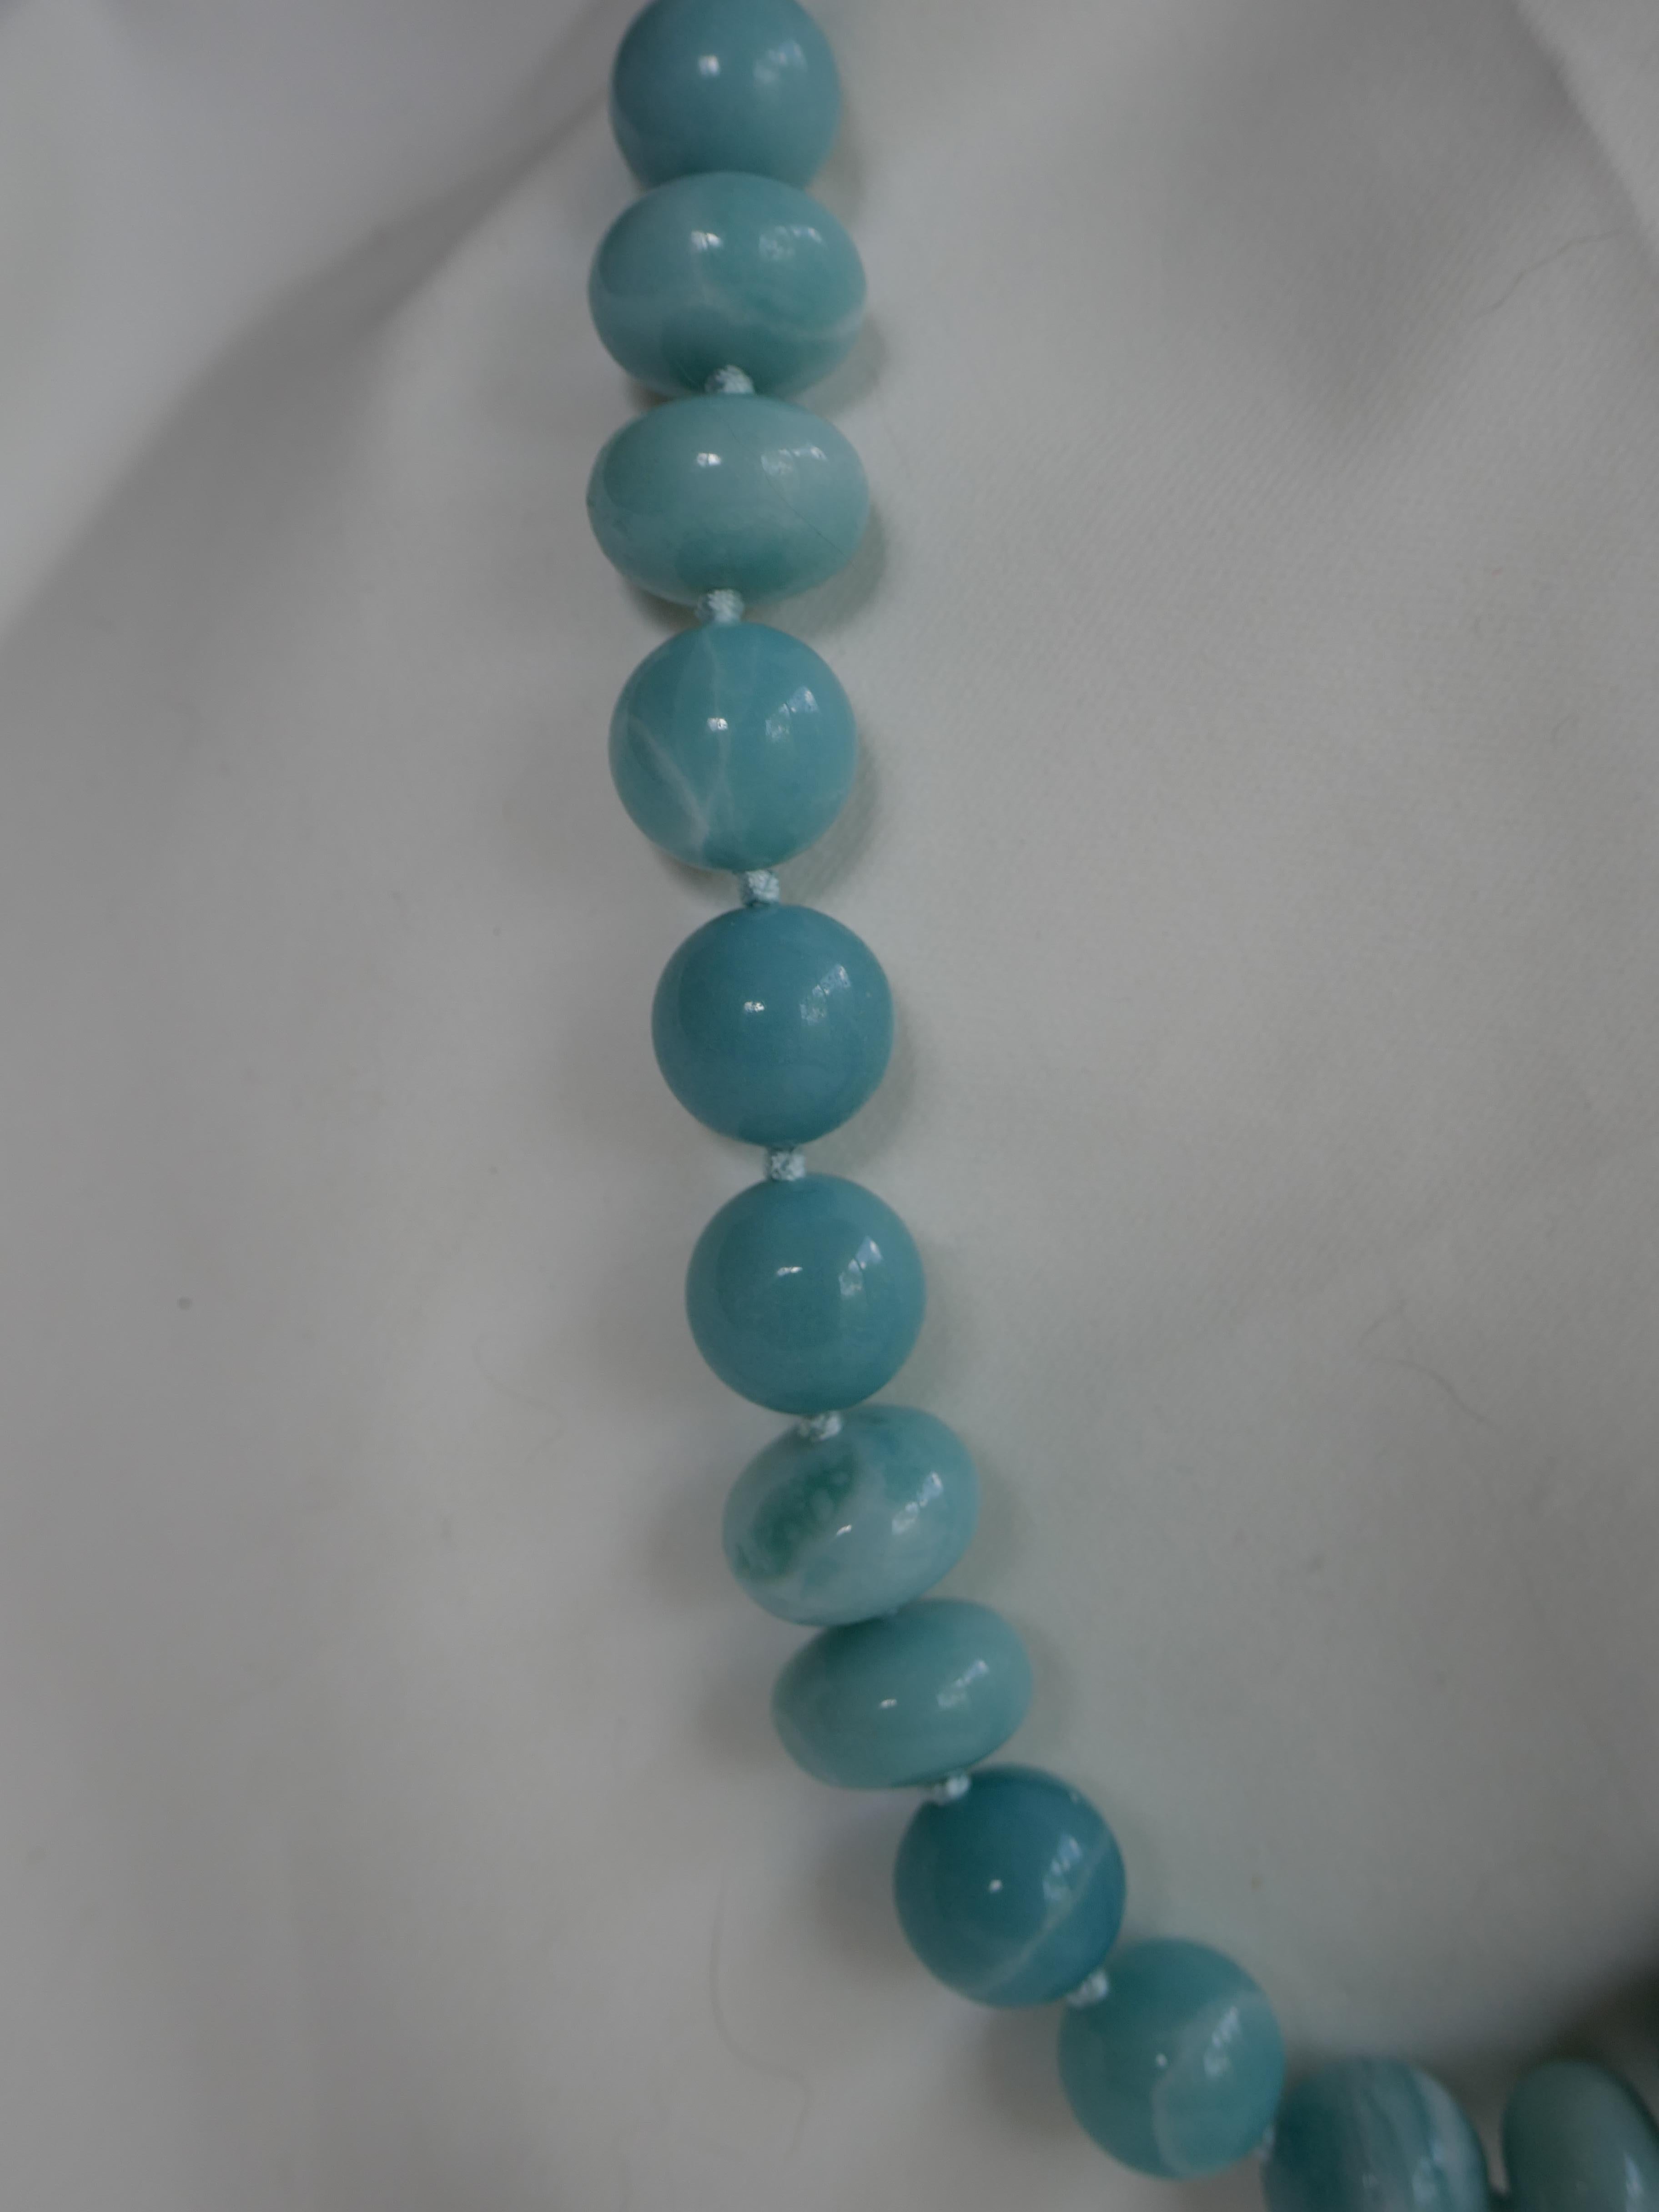 A beautiful necklace all around. This single strand amazonite necklace combines 14 mm amazonite and 16 mm amazonite roundels. The color of the amazonite is beautiful and the necklace looks amazing on. Amazonite is turquoise like in color and thus a